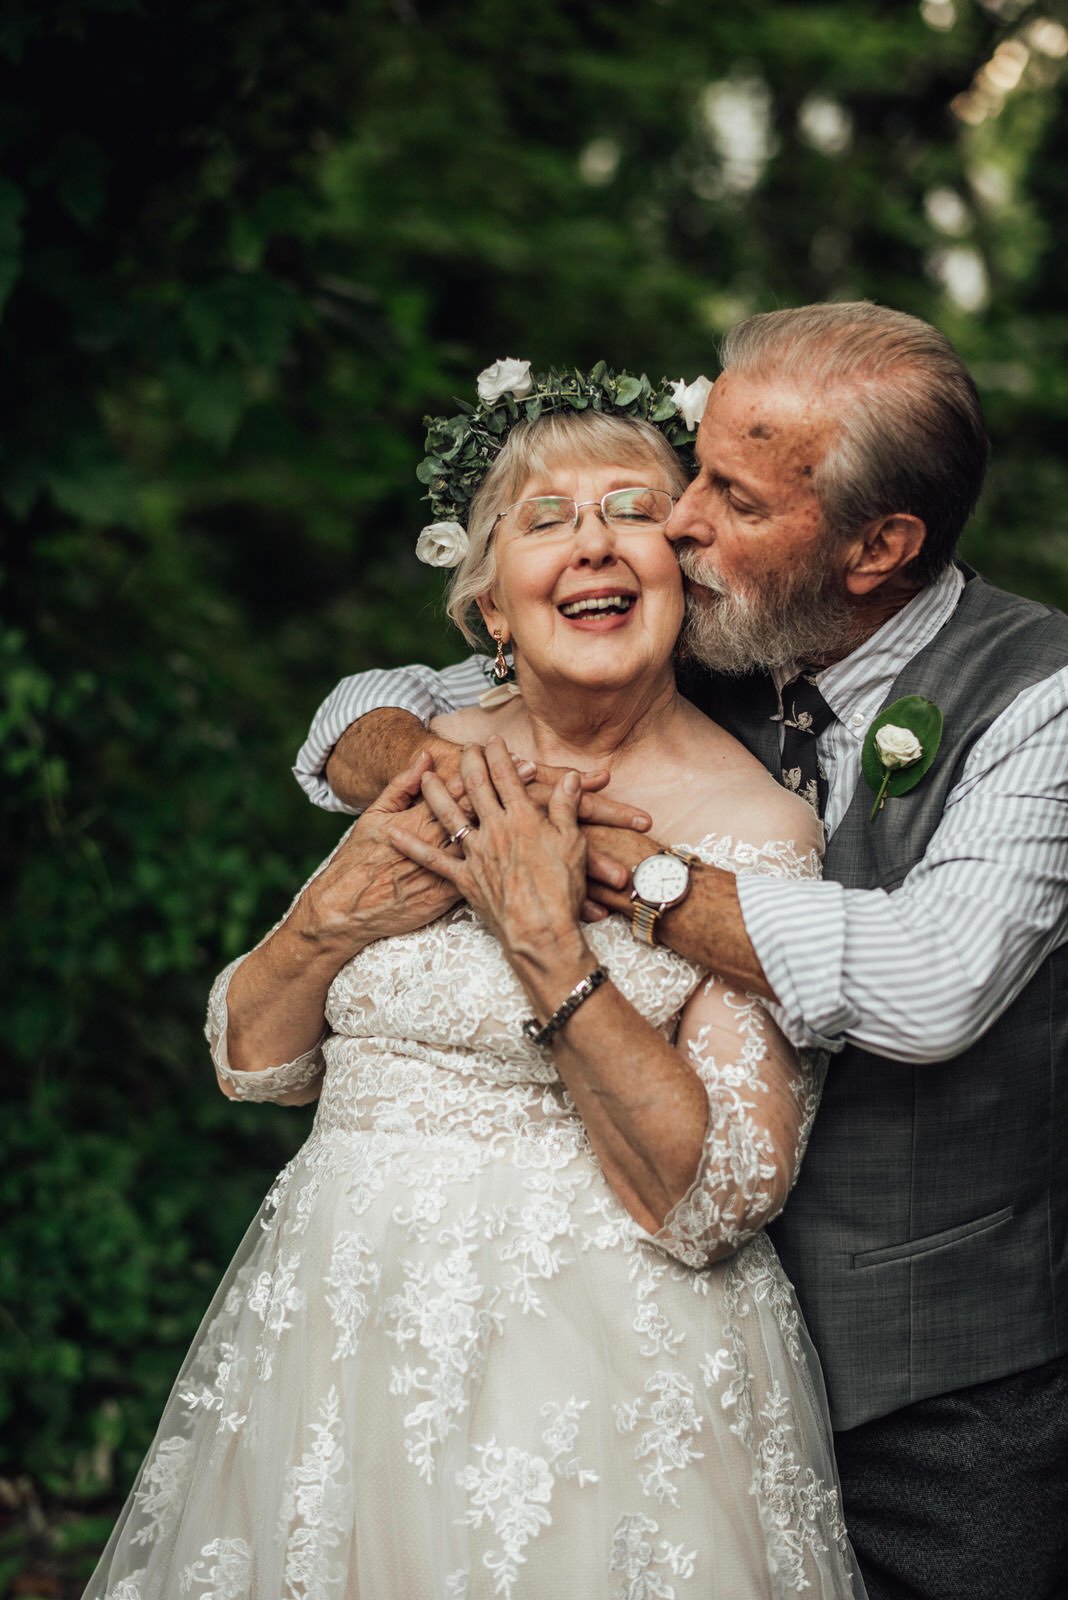 These Grandparents Posed for a 60th Anniversary Photo Shoot | PetaPixel